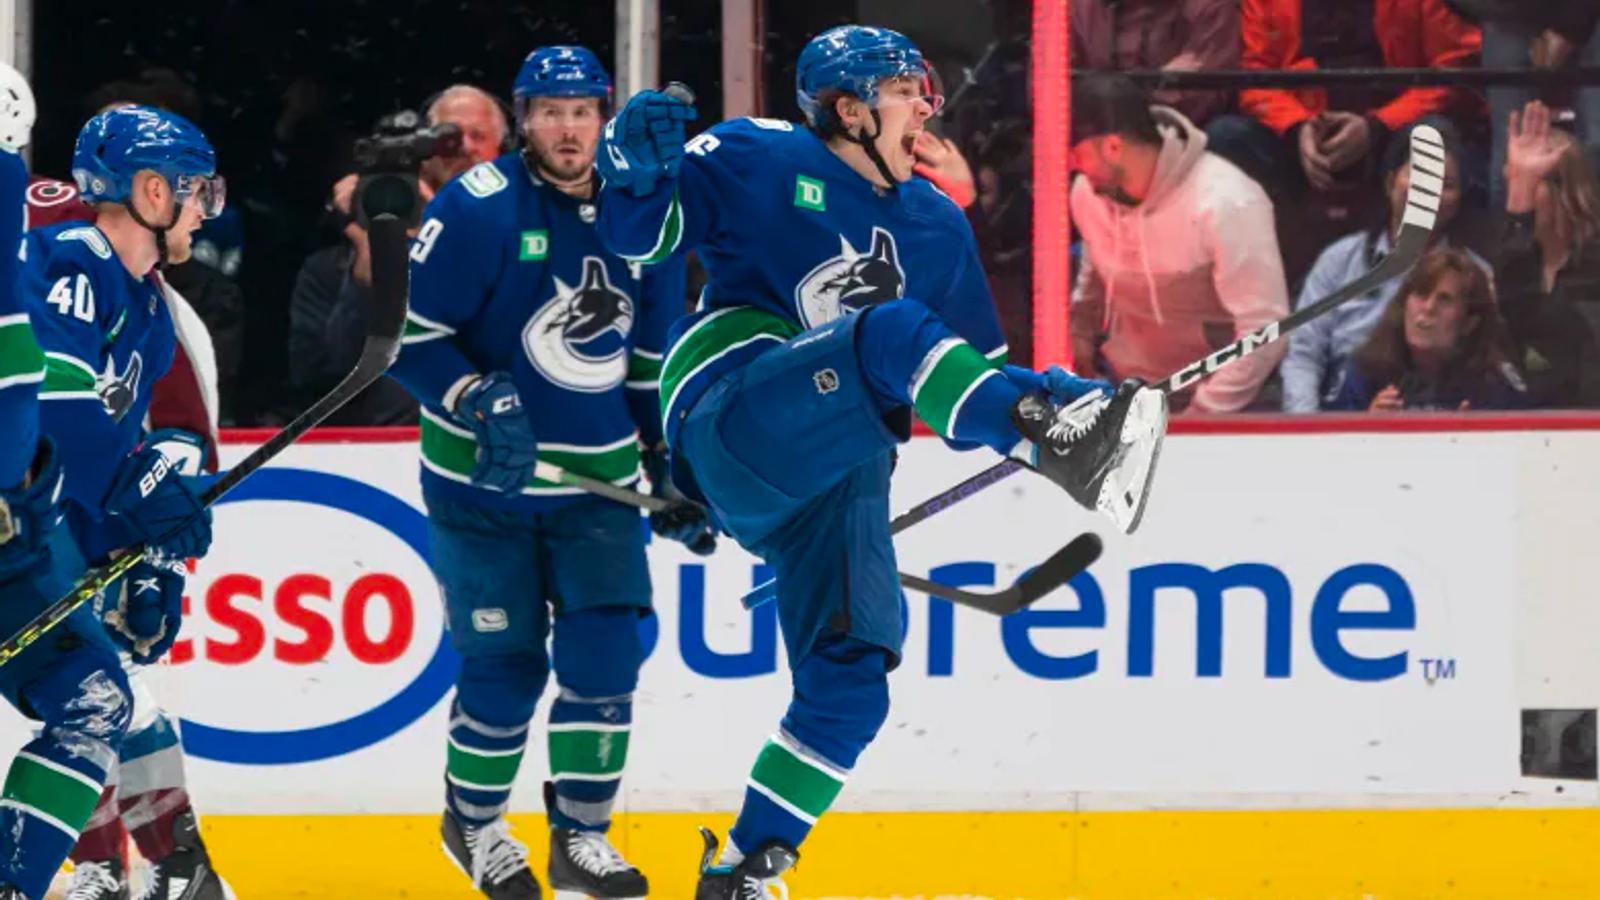 Another issue emerges out of Vancouver that could land in another trade!